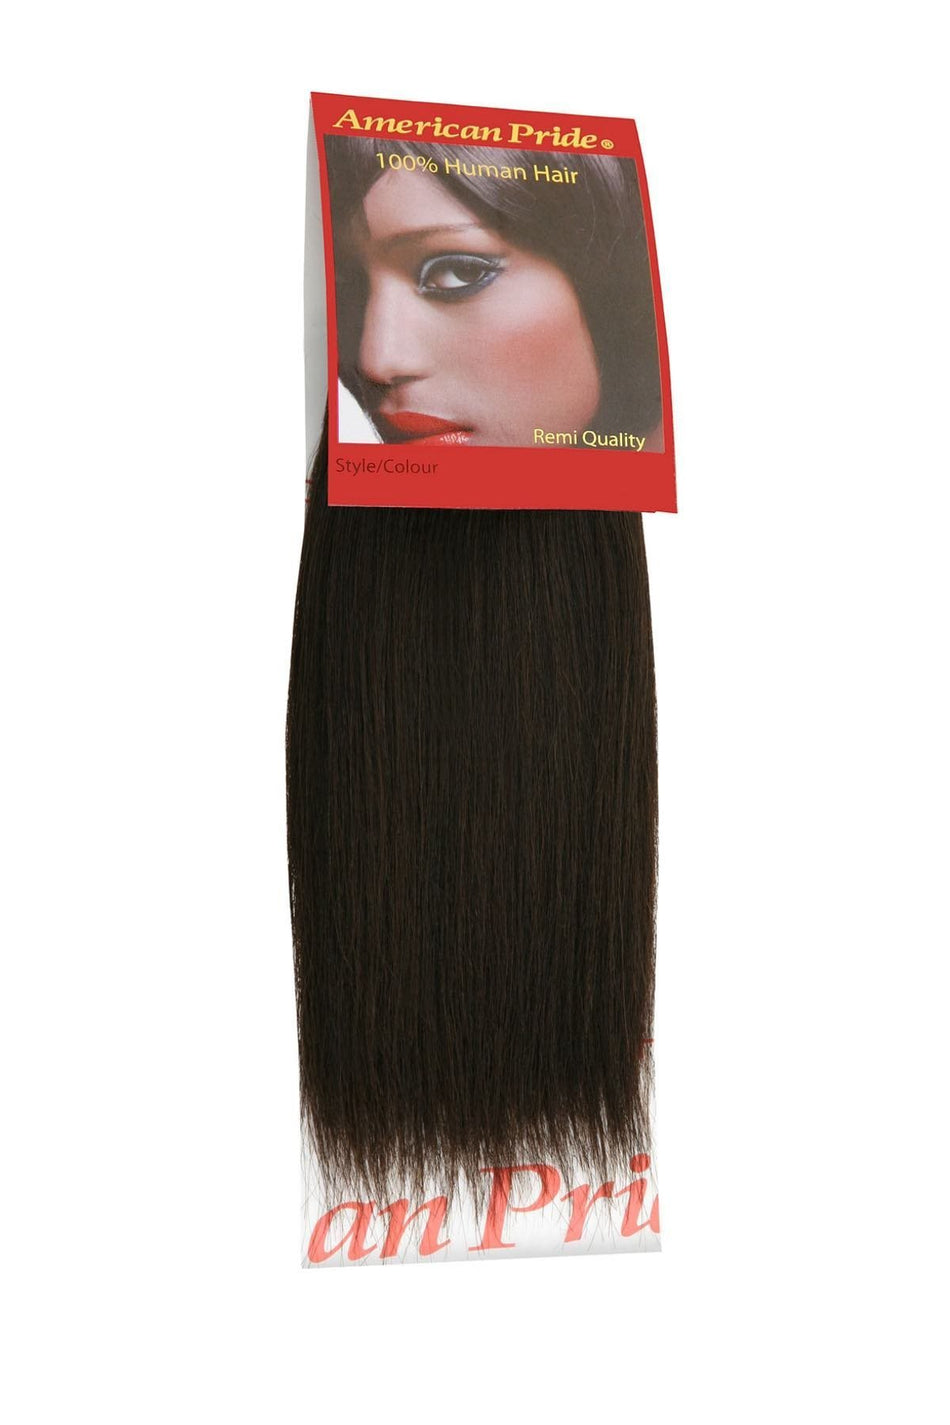 Yaki Weave | Human Hair Extensions | 8 Inch | Brownest Brown (2) - Beauty Hair Products LtdHair Extensions